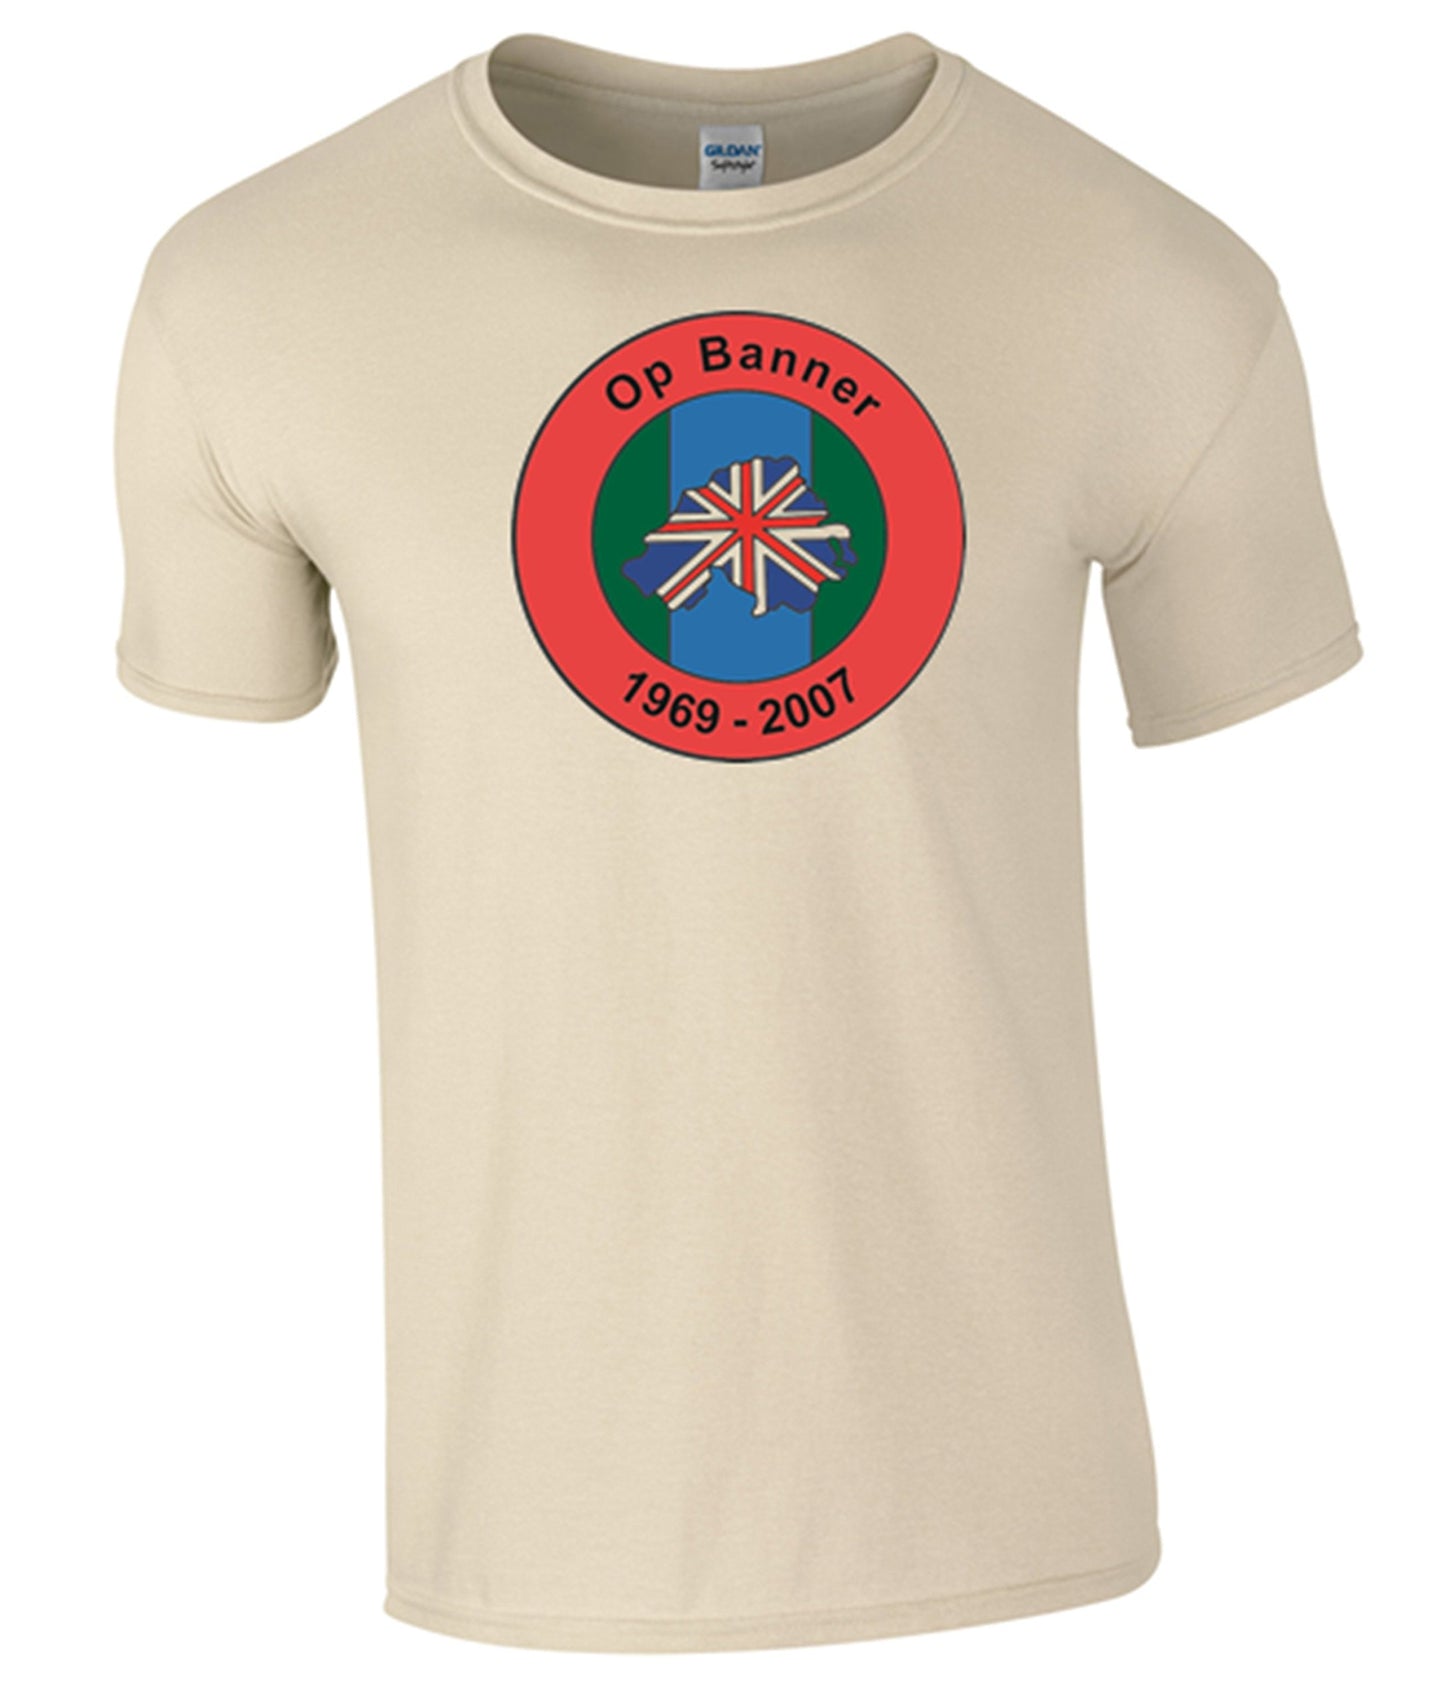 Northern Ireland Ops Banner T-Shirt (XL, Sand) - Army 1157 kit Army 1157 Kit